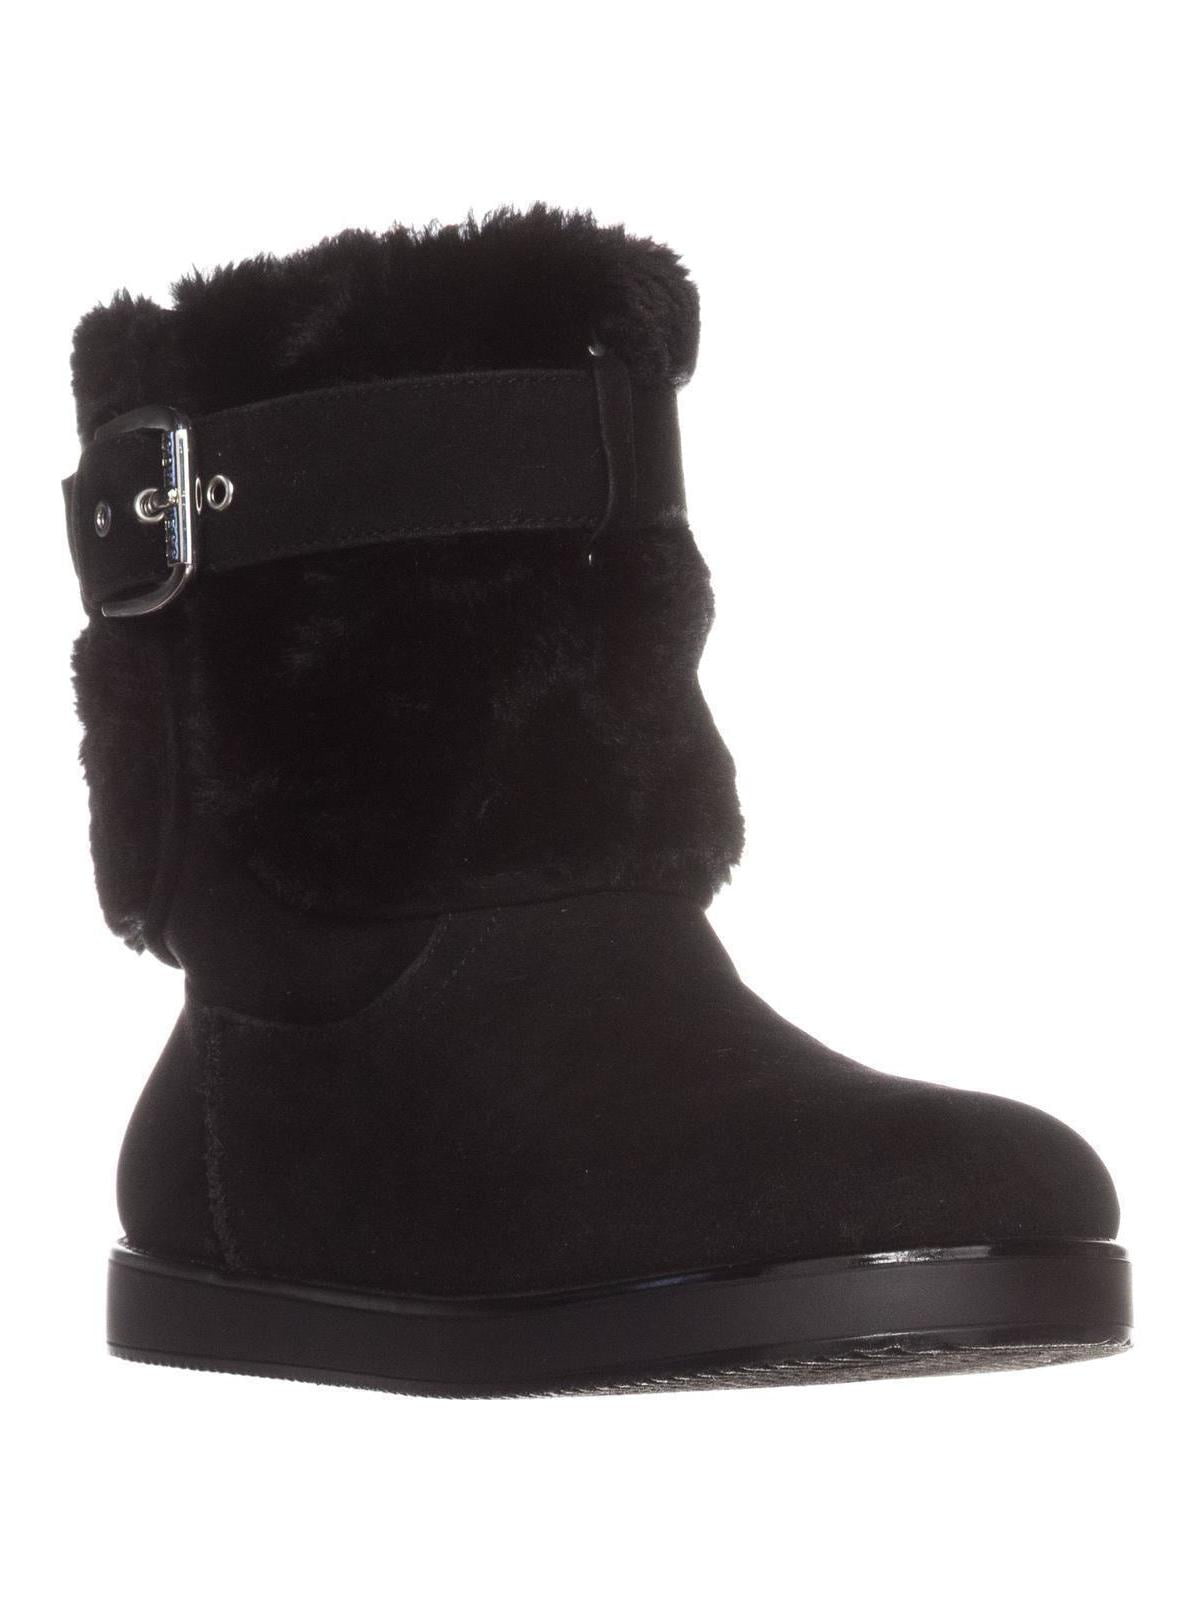 guess fur lined boots